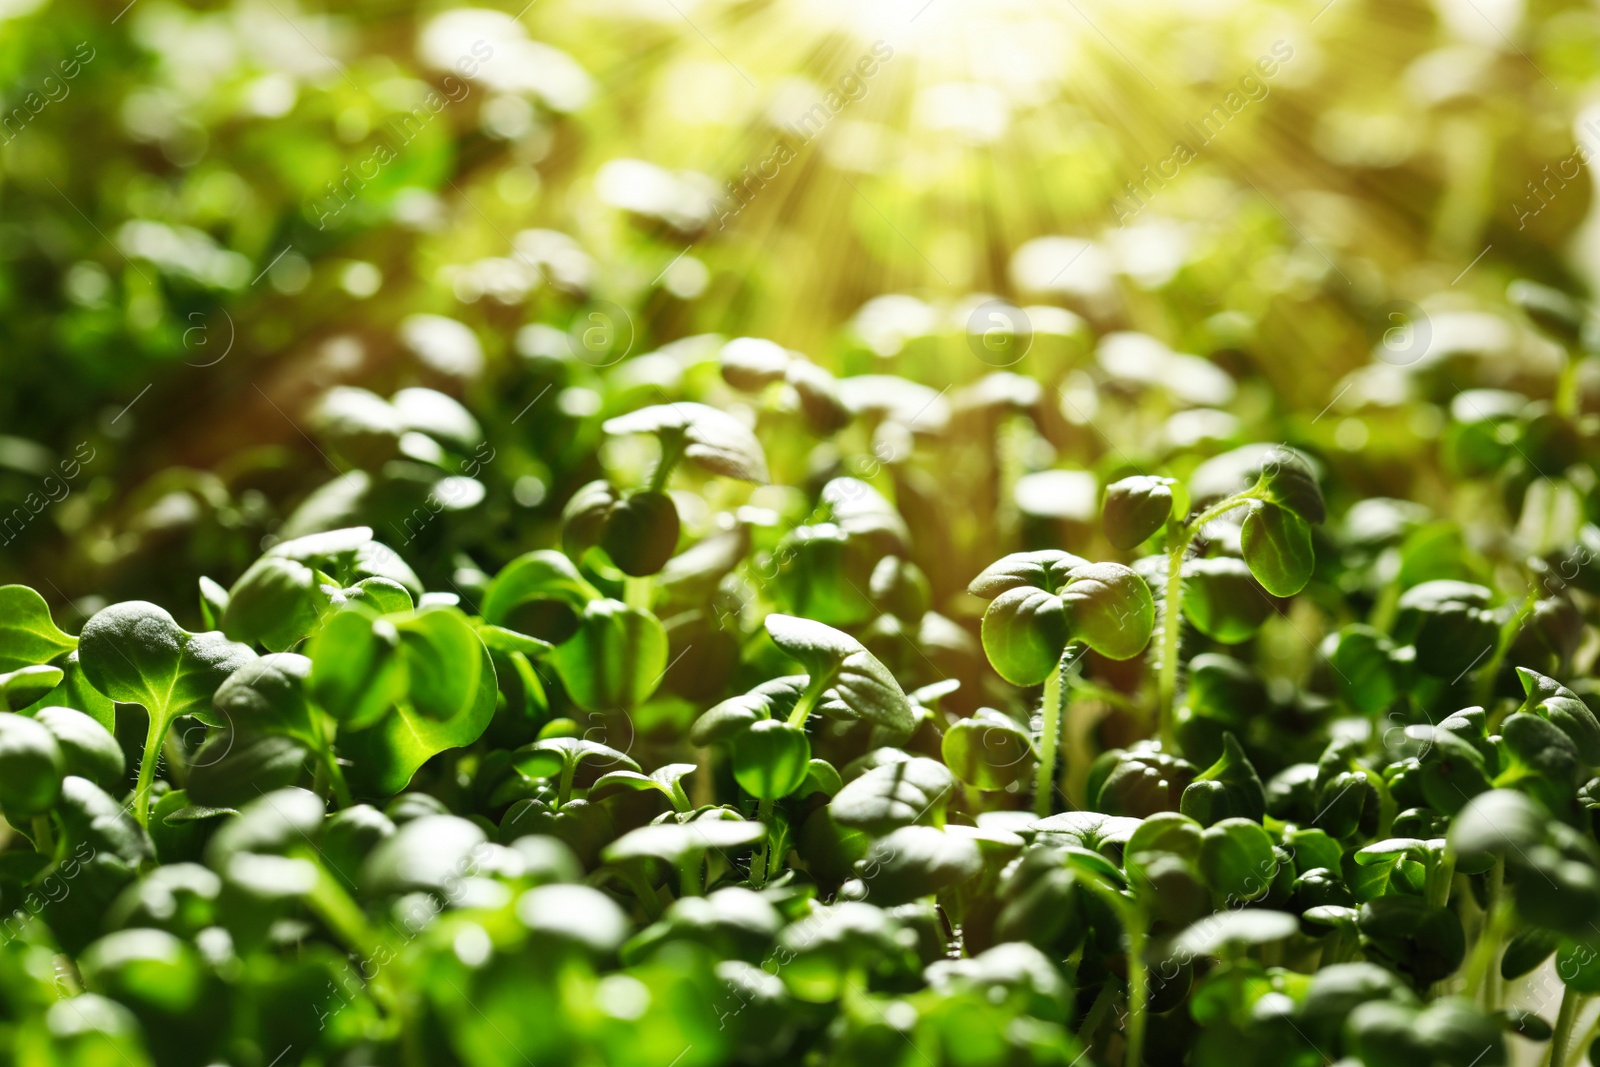 Image of Sunlit young sprouts of arugula plant in soil, closeup